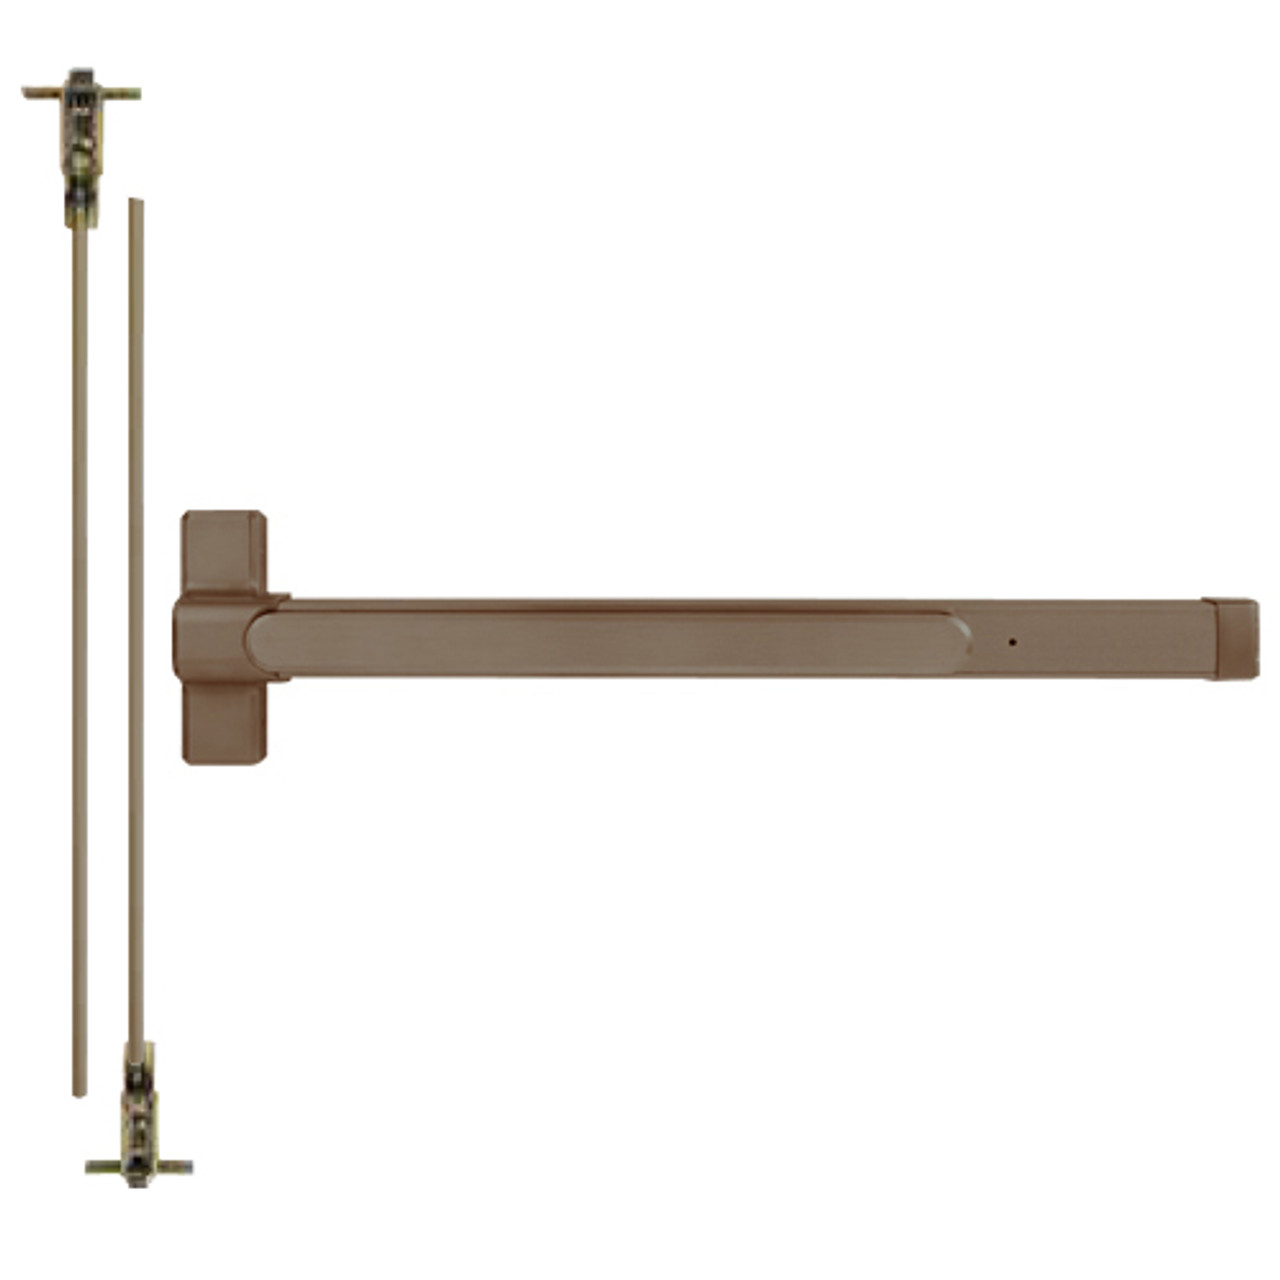 QED124LR-48-8-313AN Stanley QED100 Series Heavy Duty Concealed Vertical Rod Hex Dog Exit Device in Anodized Duranodic Bronze Finish